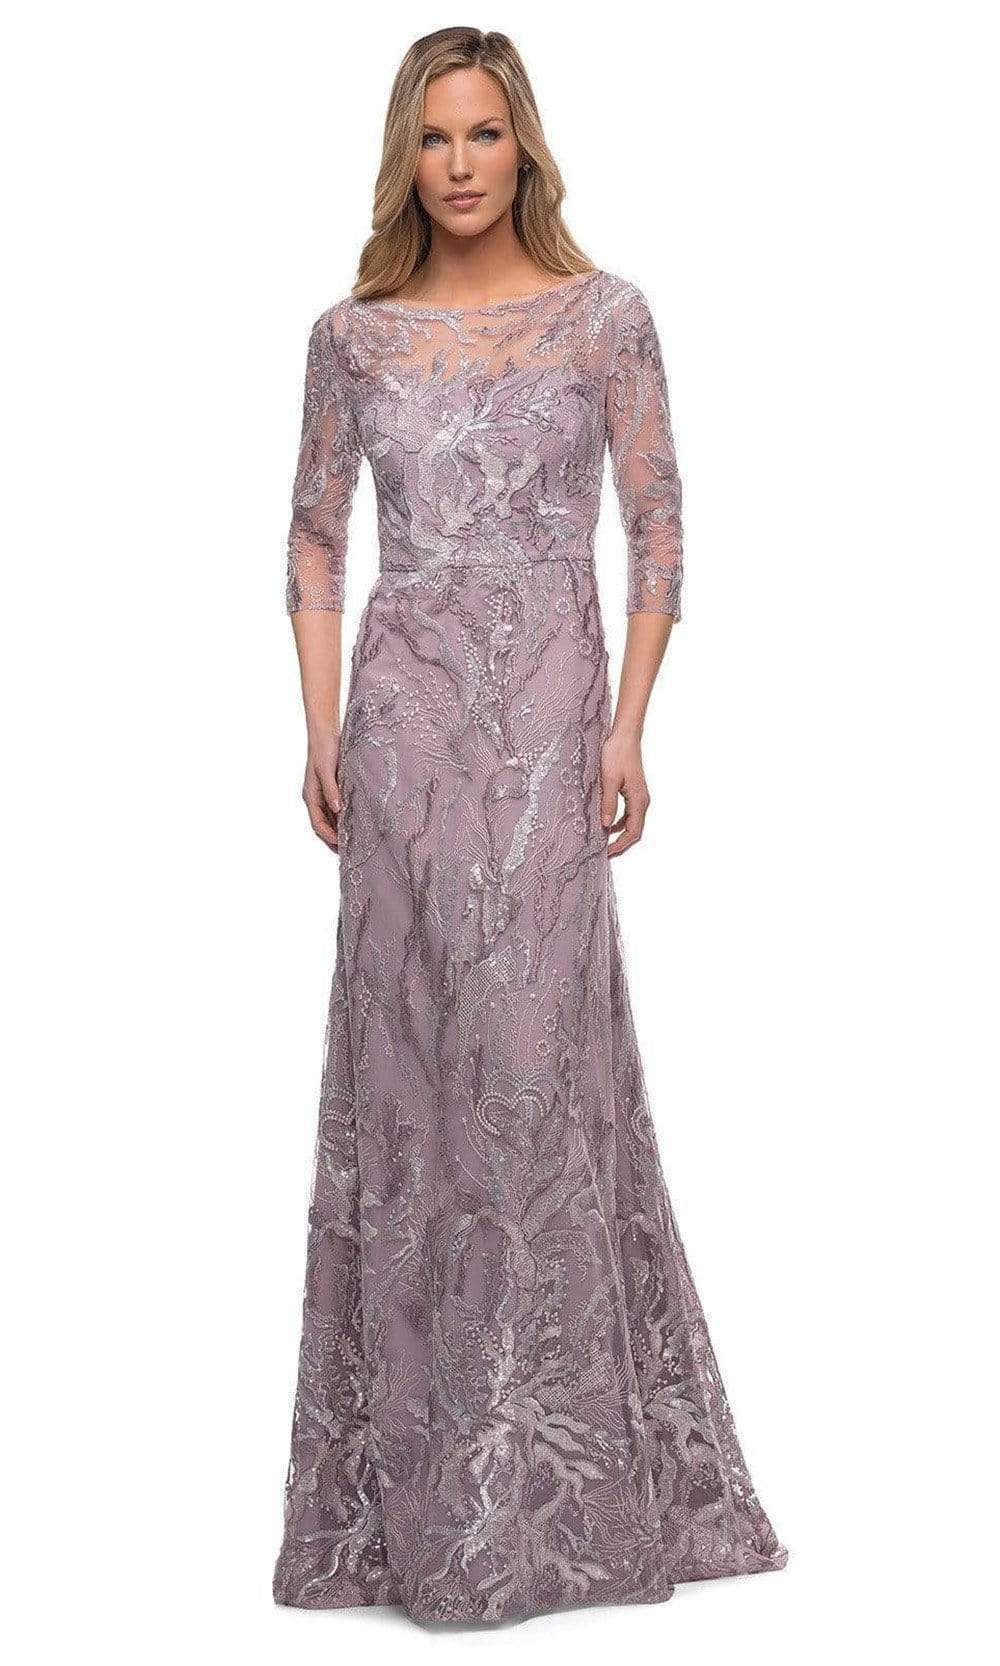 La Femme - 29233 Sheer Sleeve Embroidered A-line Gown
